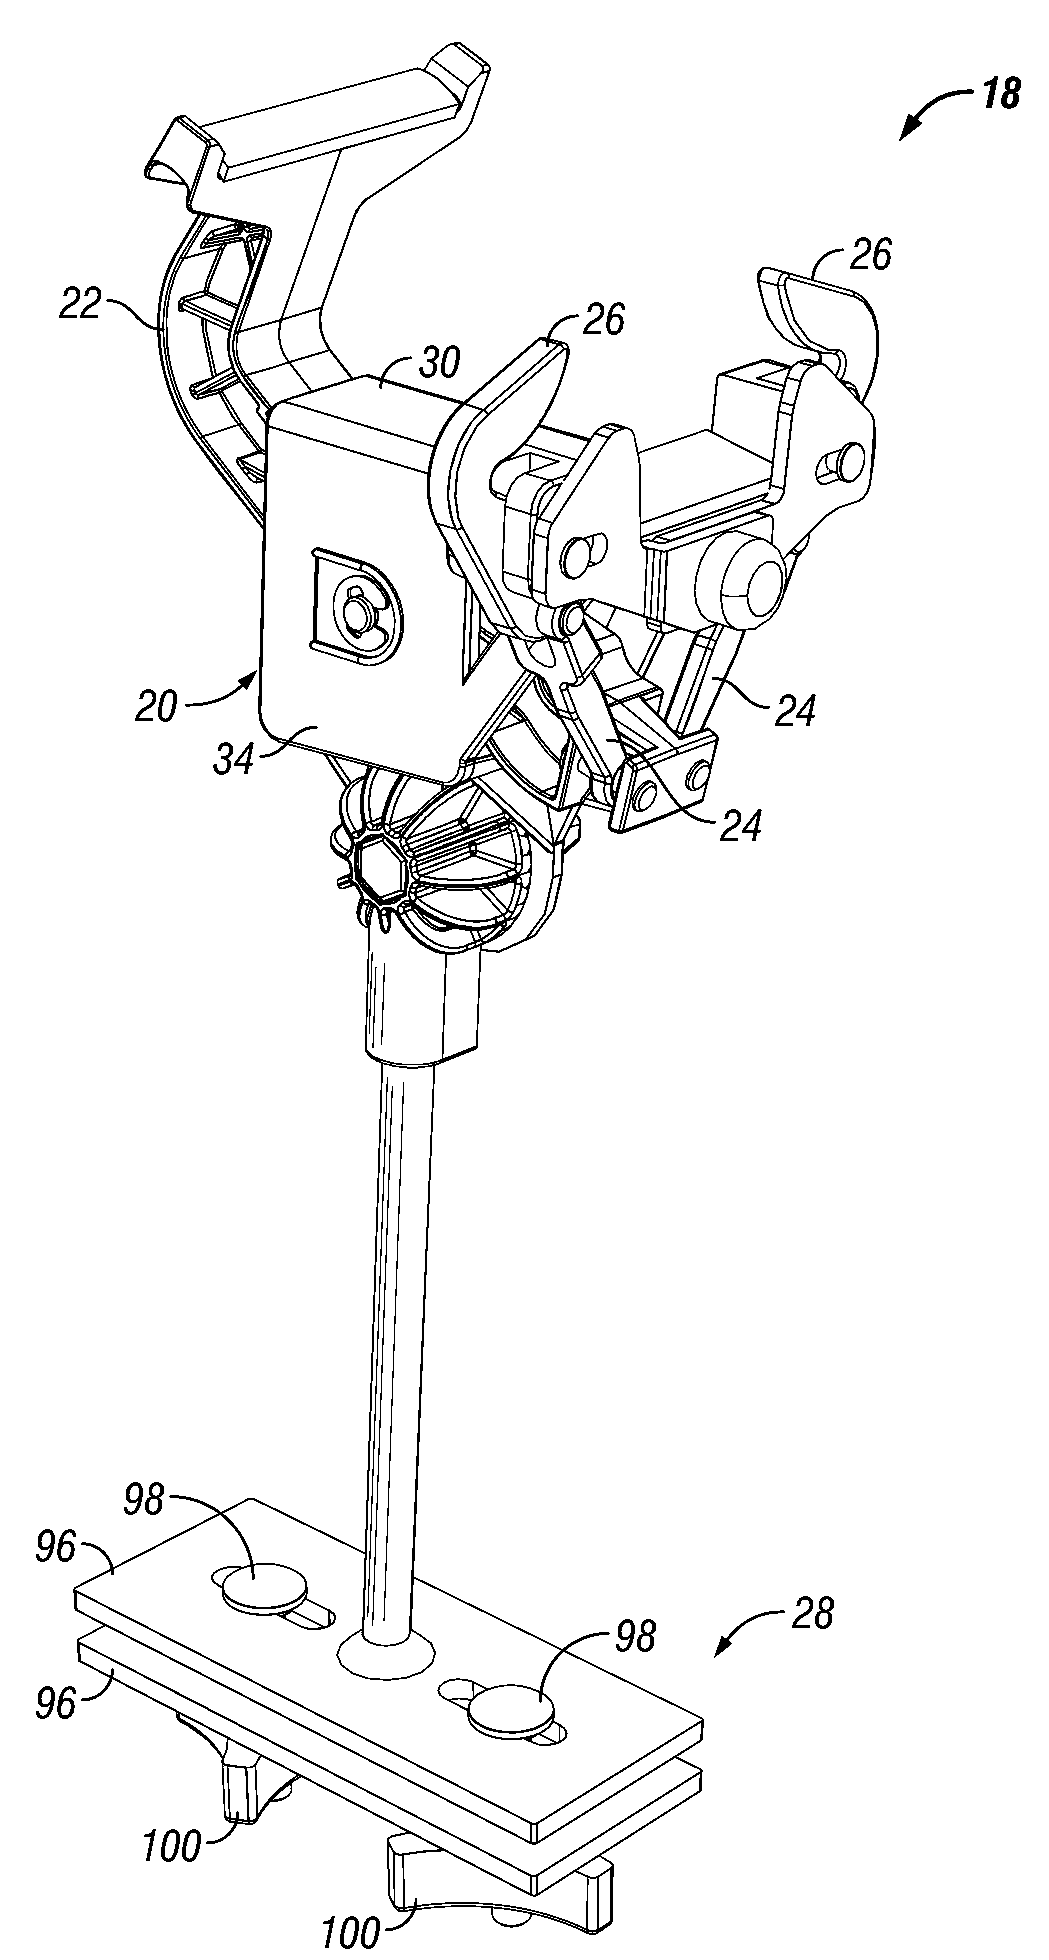 Device and method for securing a bow